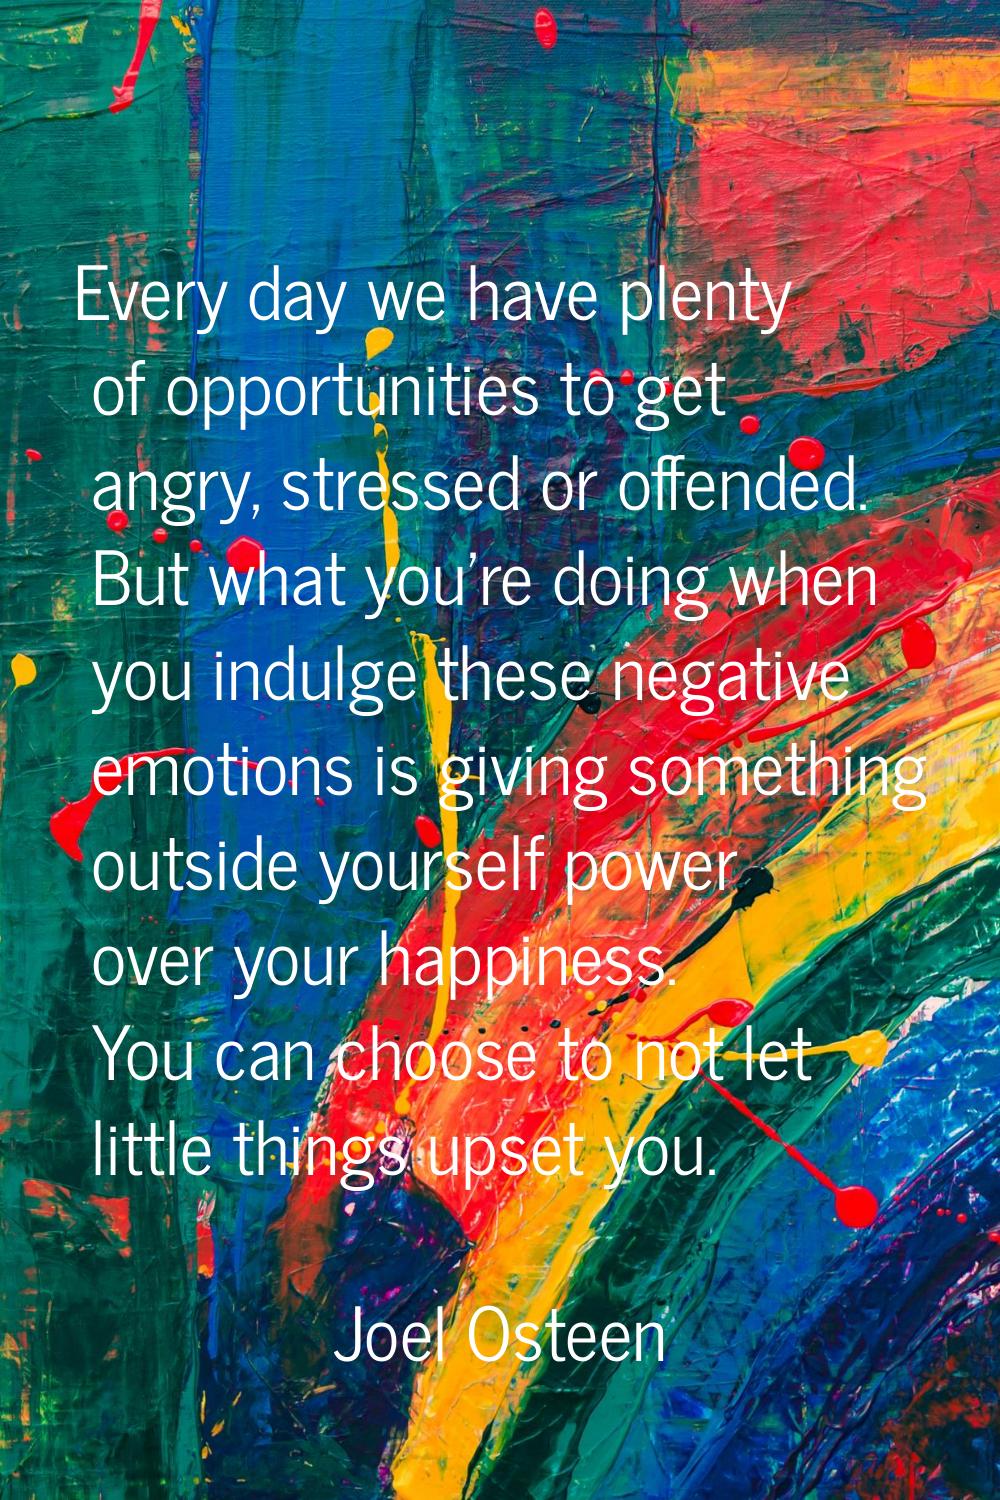 Every day we have plenty of opportunities to get angry, stressed or offended. But what you're doing